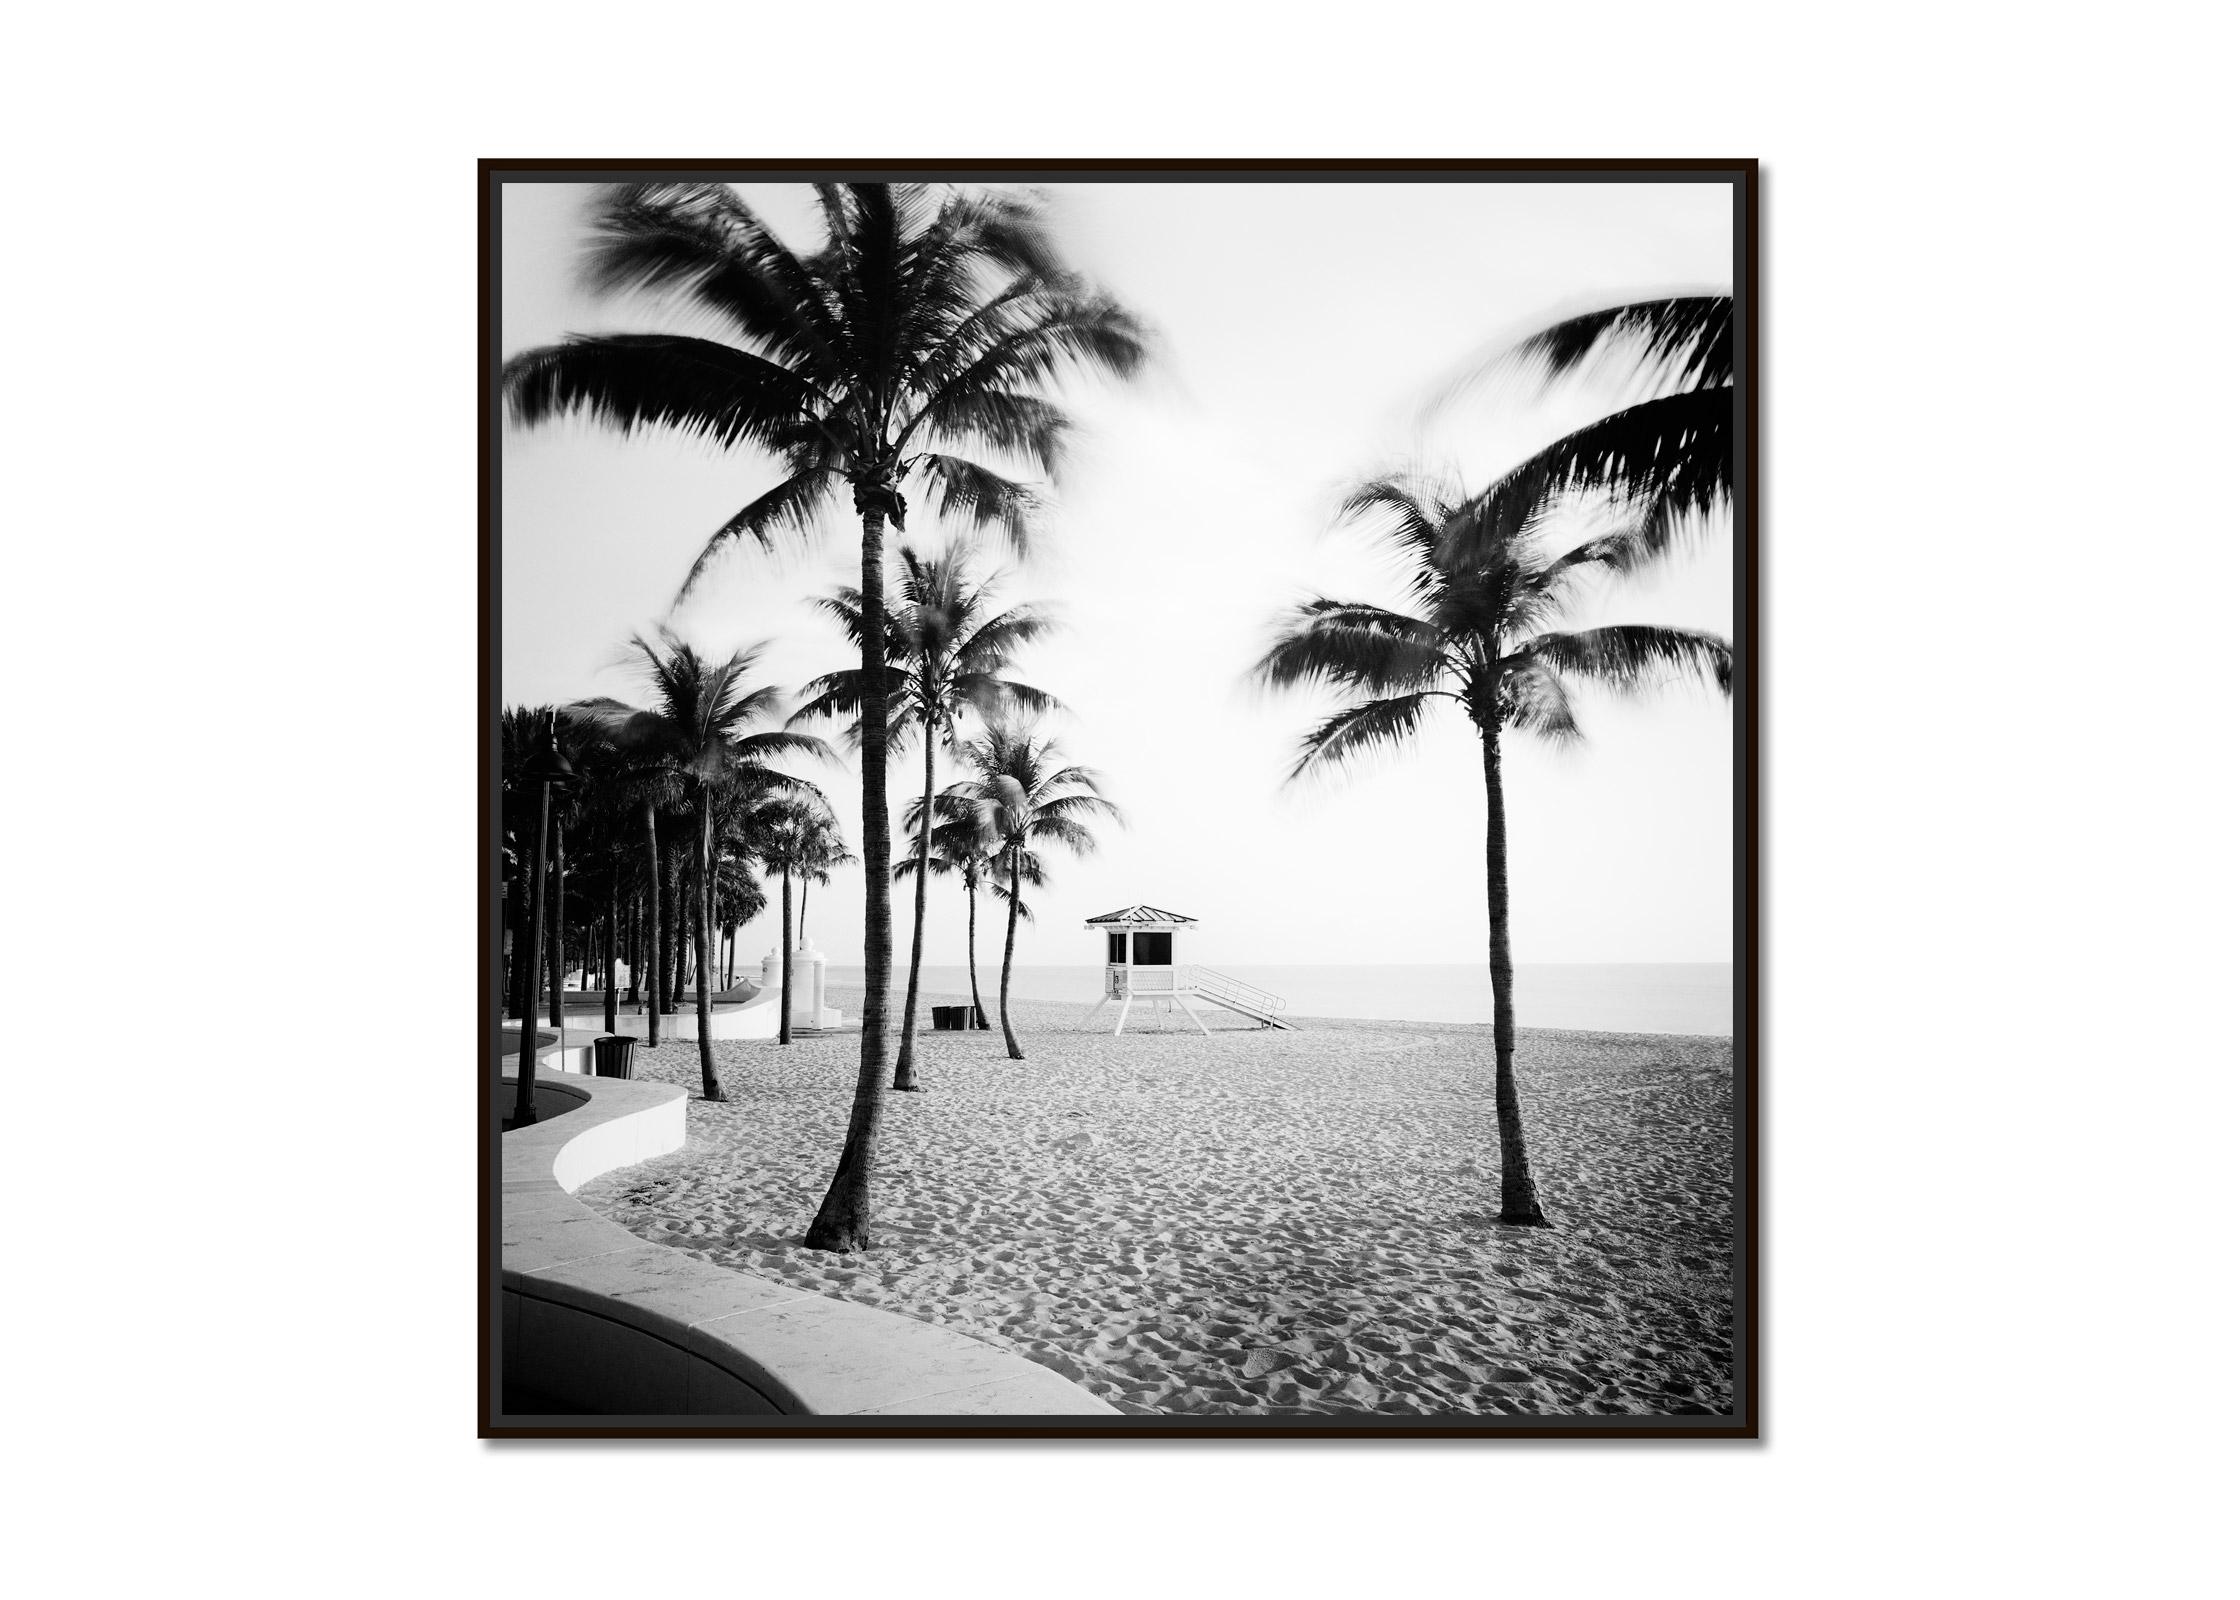 Fort Lauderdale Beach, Palm Tree, Florida, black and white landscape photography - Photograph by Gerald Berghammer